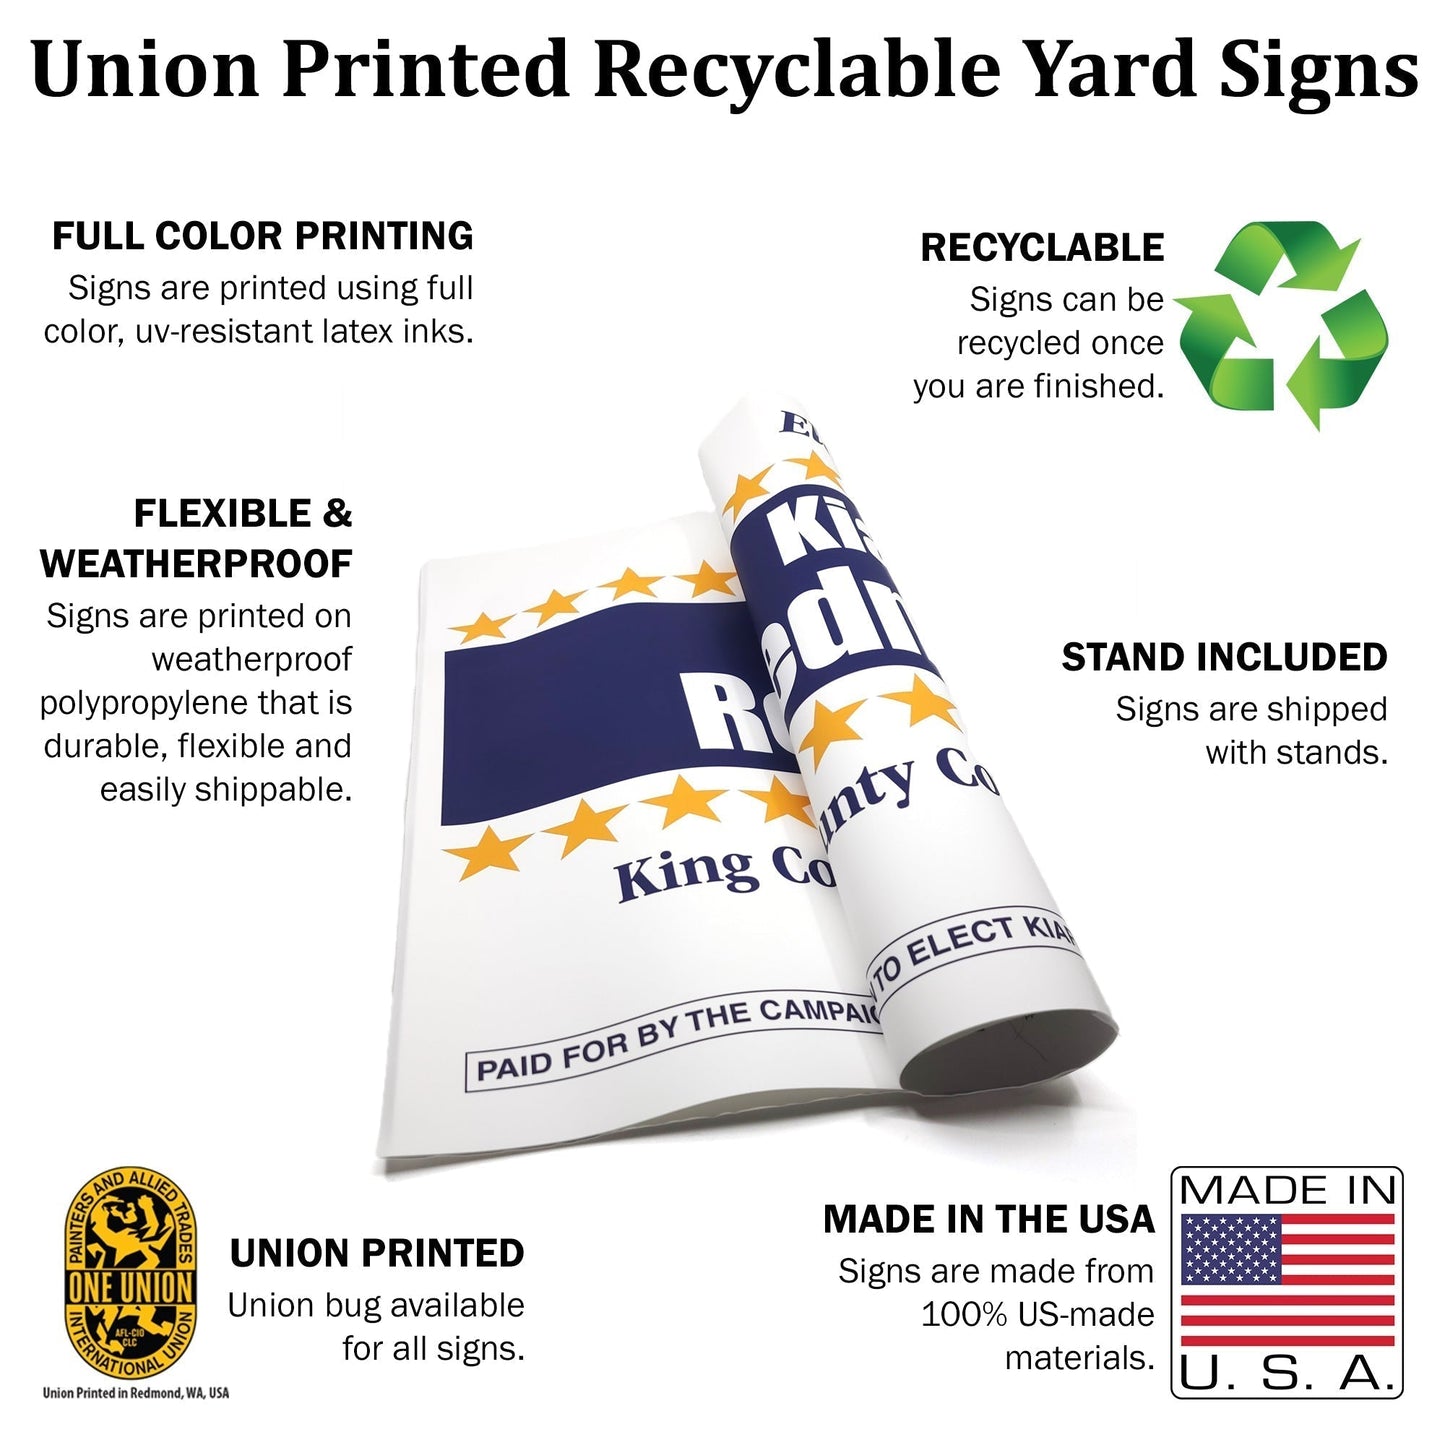 MerchBlue Union-Printed Yard Sign - 24x18 - Text Blocks design - Recyclable - Made in the USA